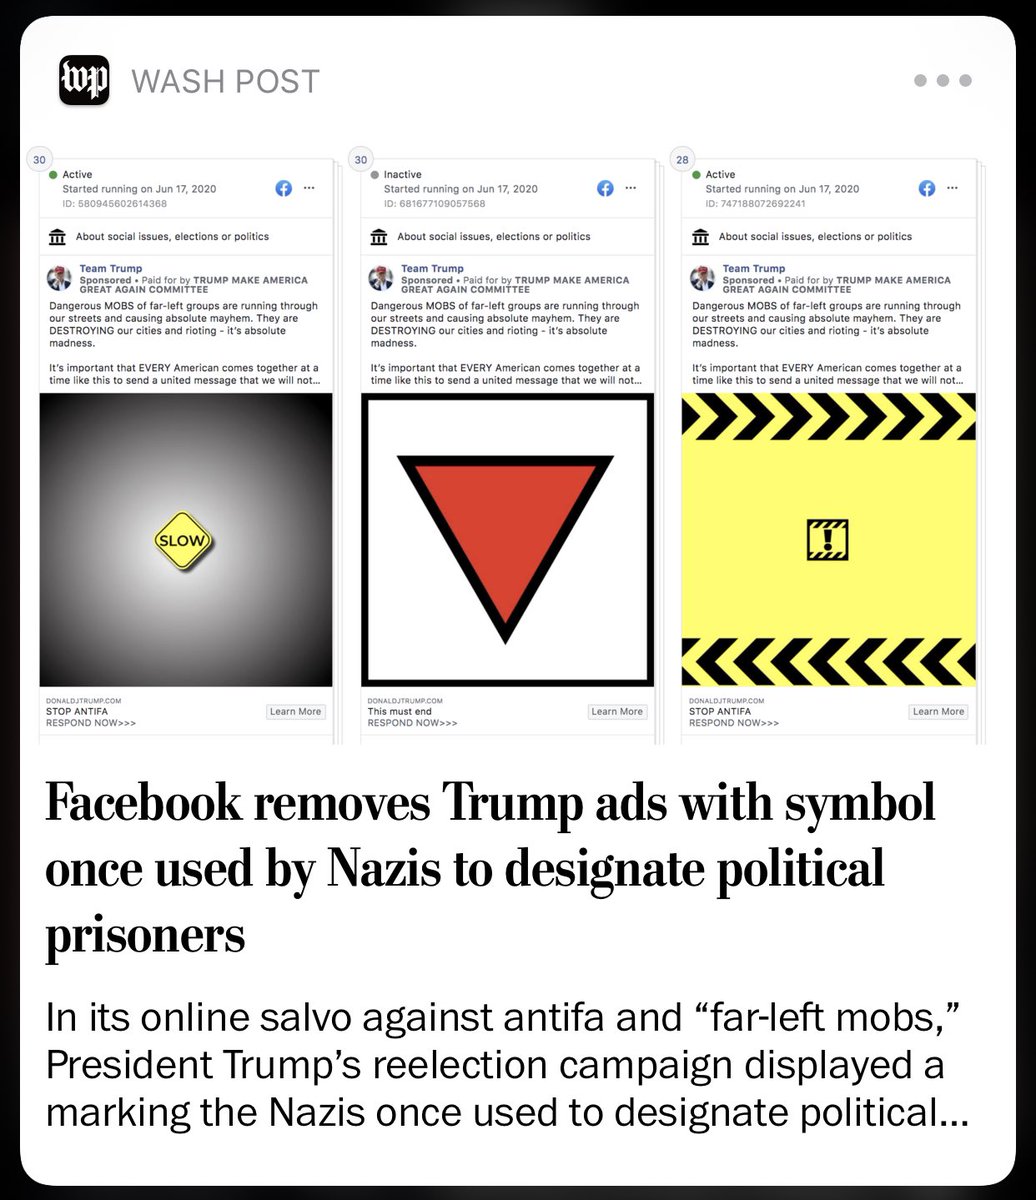 And now we wait for the campaign to put out the inevitable “this is proof of bias” statement https://www.cnn.com/2020/06/18/tech/facebook-trump-ads-triangle-takedown/index.html